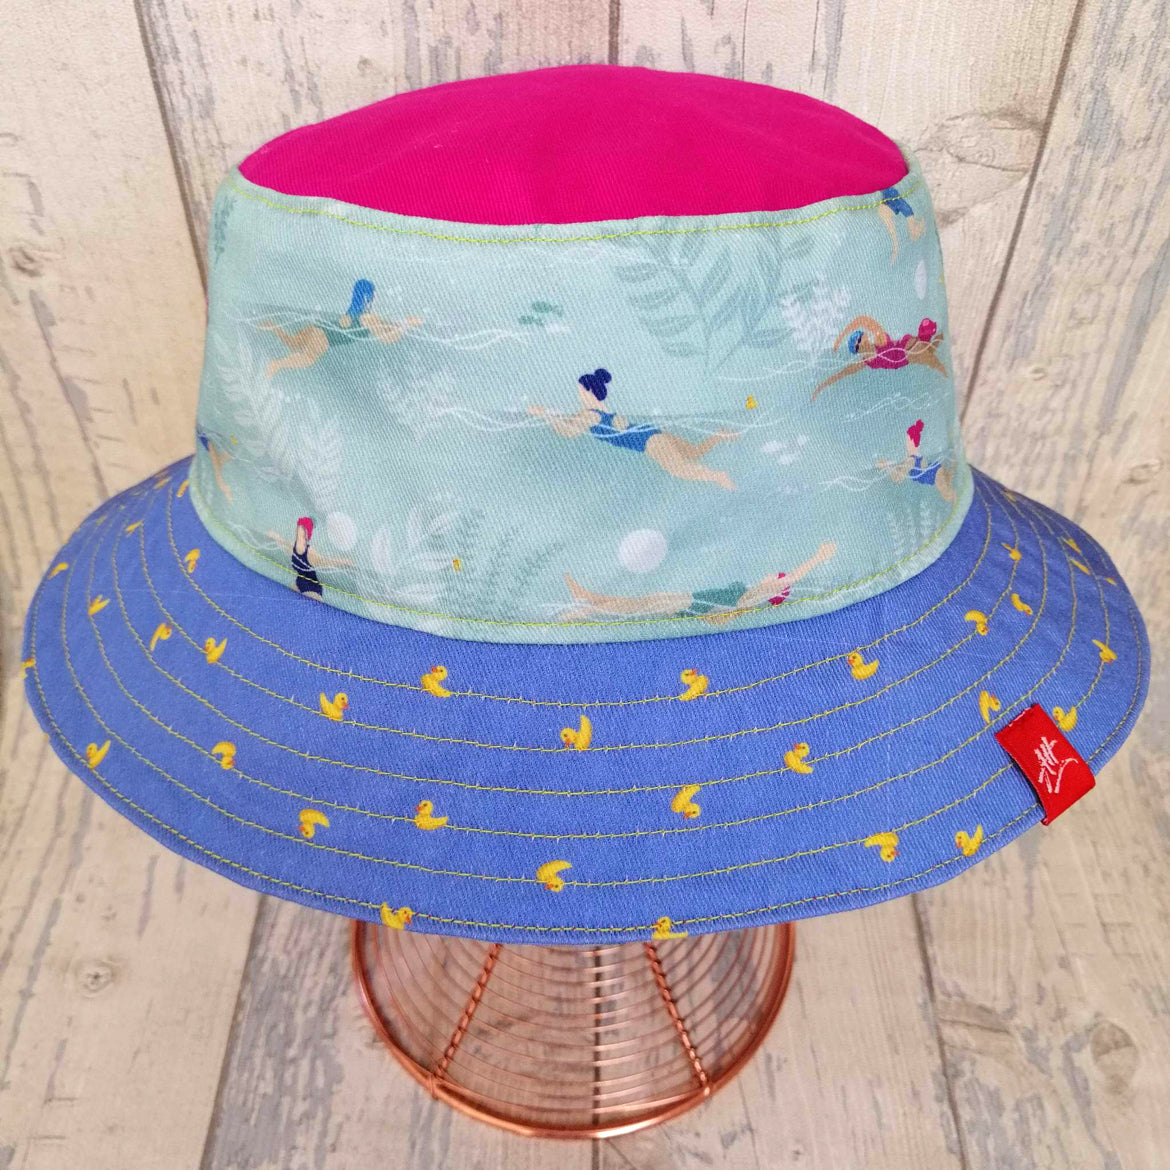 Reversible festival bucket hat in yellow, pink, mauve and duck-egg, with swimmers